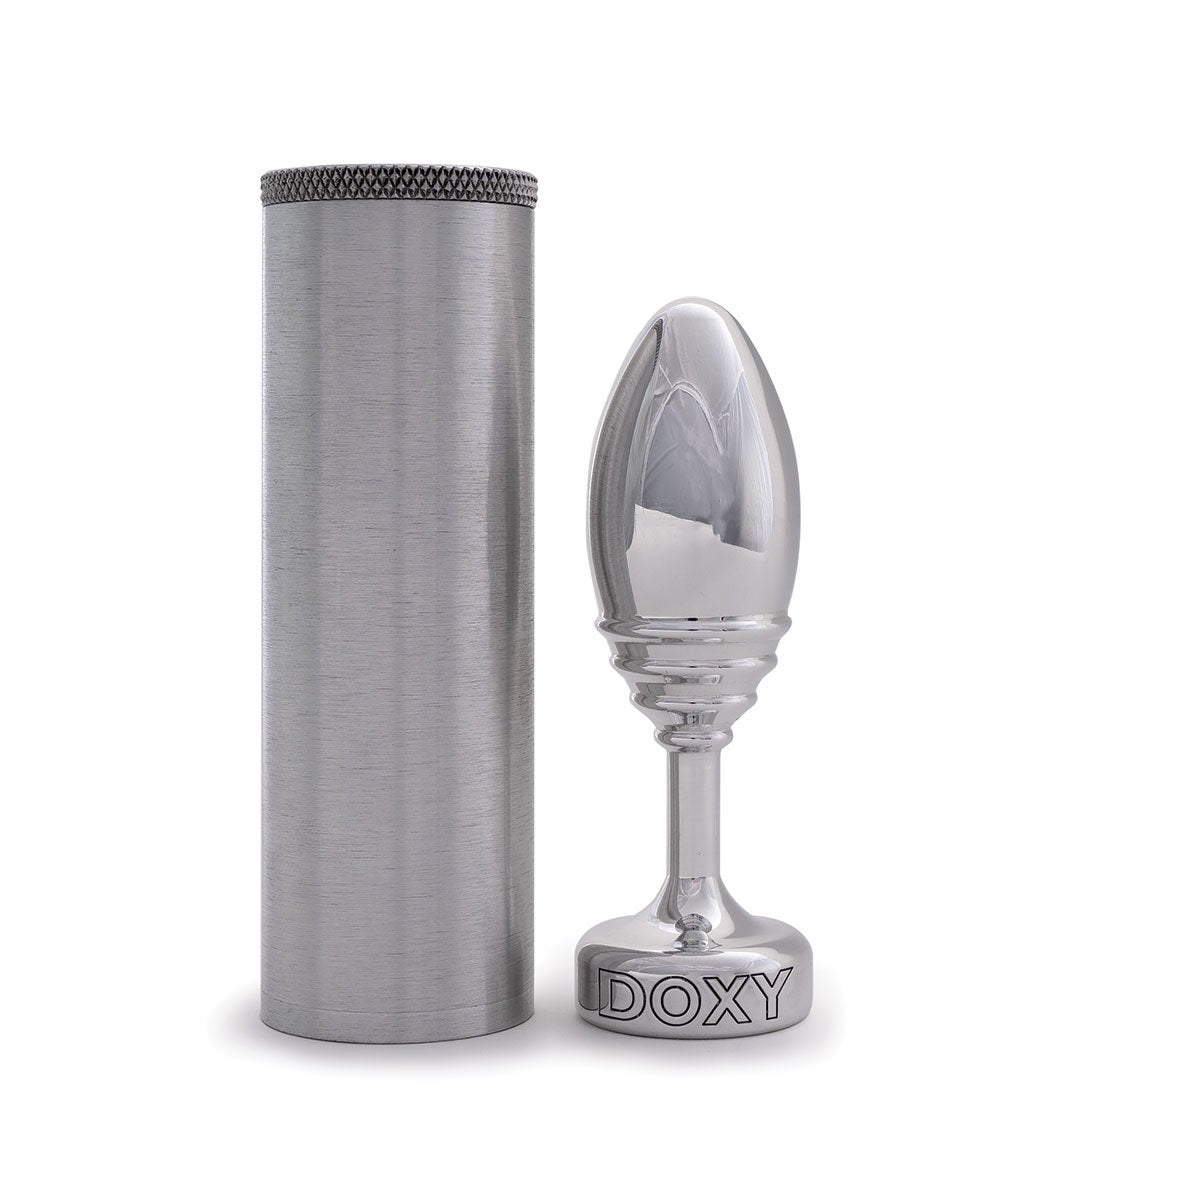 Doxy Ribbed Plug - Buy At Luxury Toy X - Free 3-Day Shipping